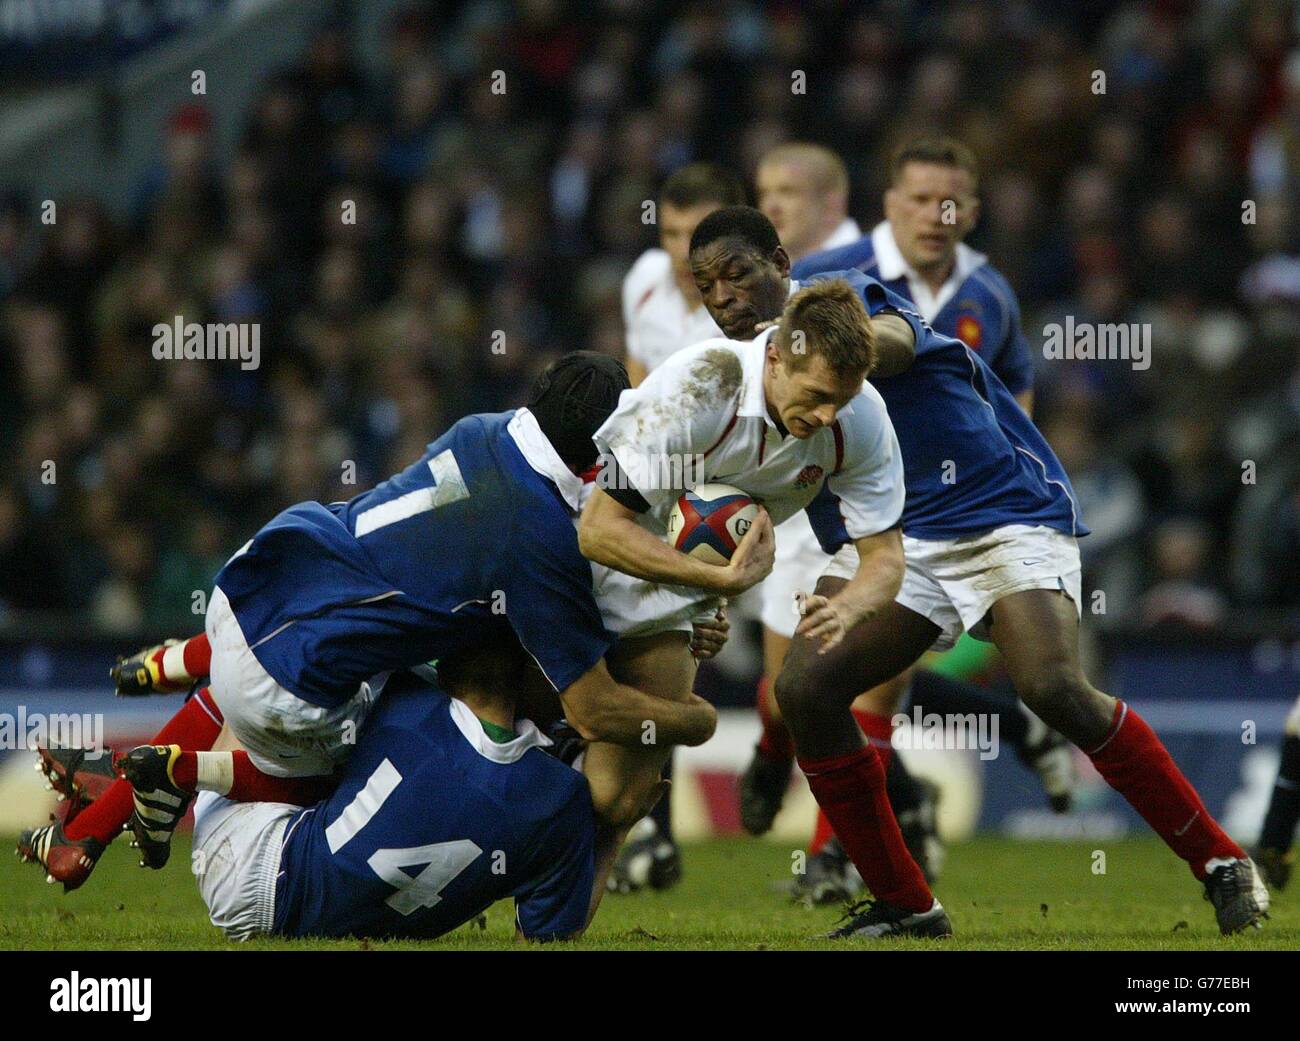 Tournoi RBS 6 Nations Angleterre/France Banque D'Images